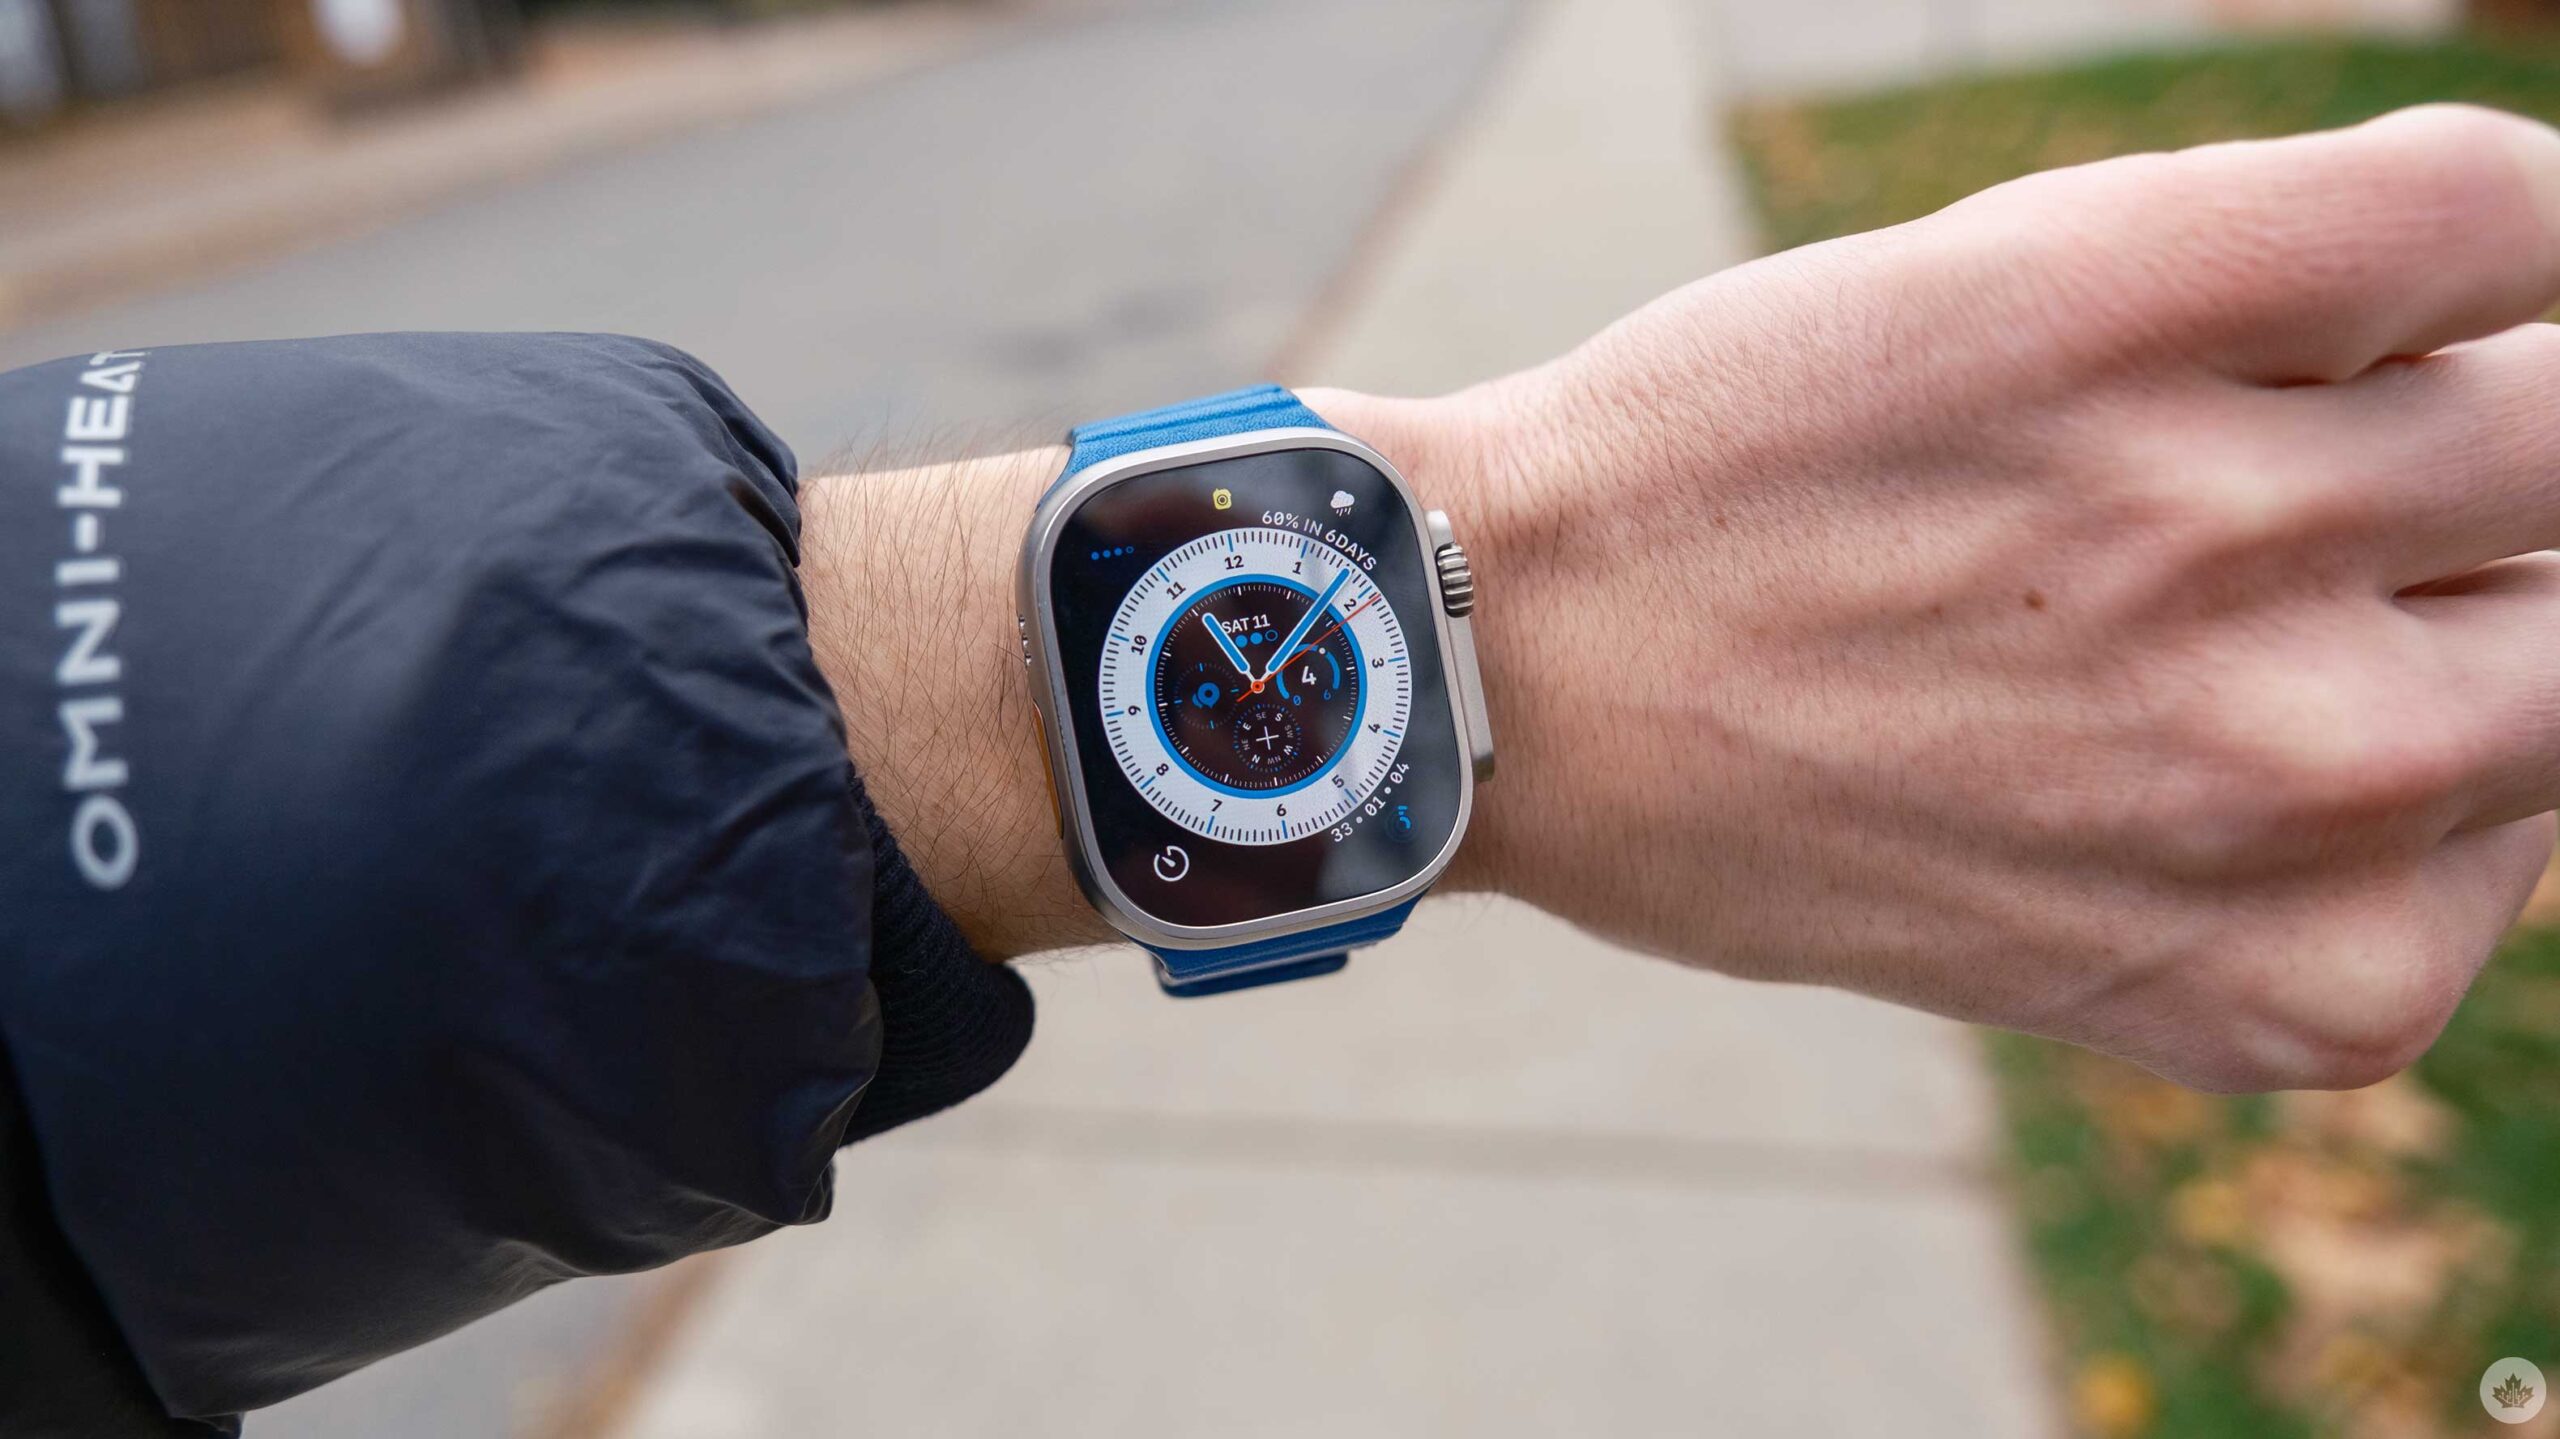 What it’s like to use an Apple Watch with cellular in Canada